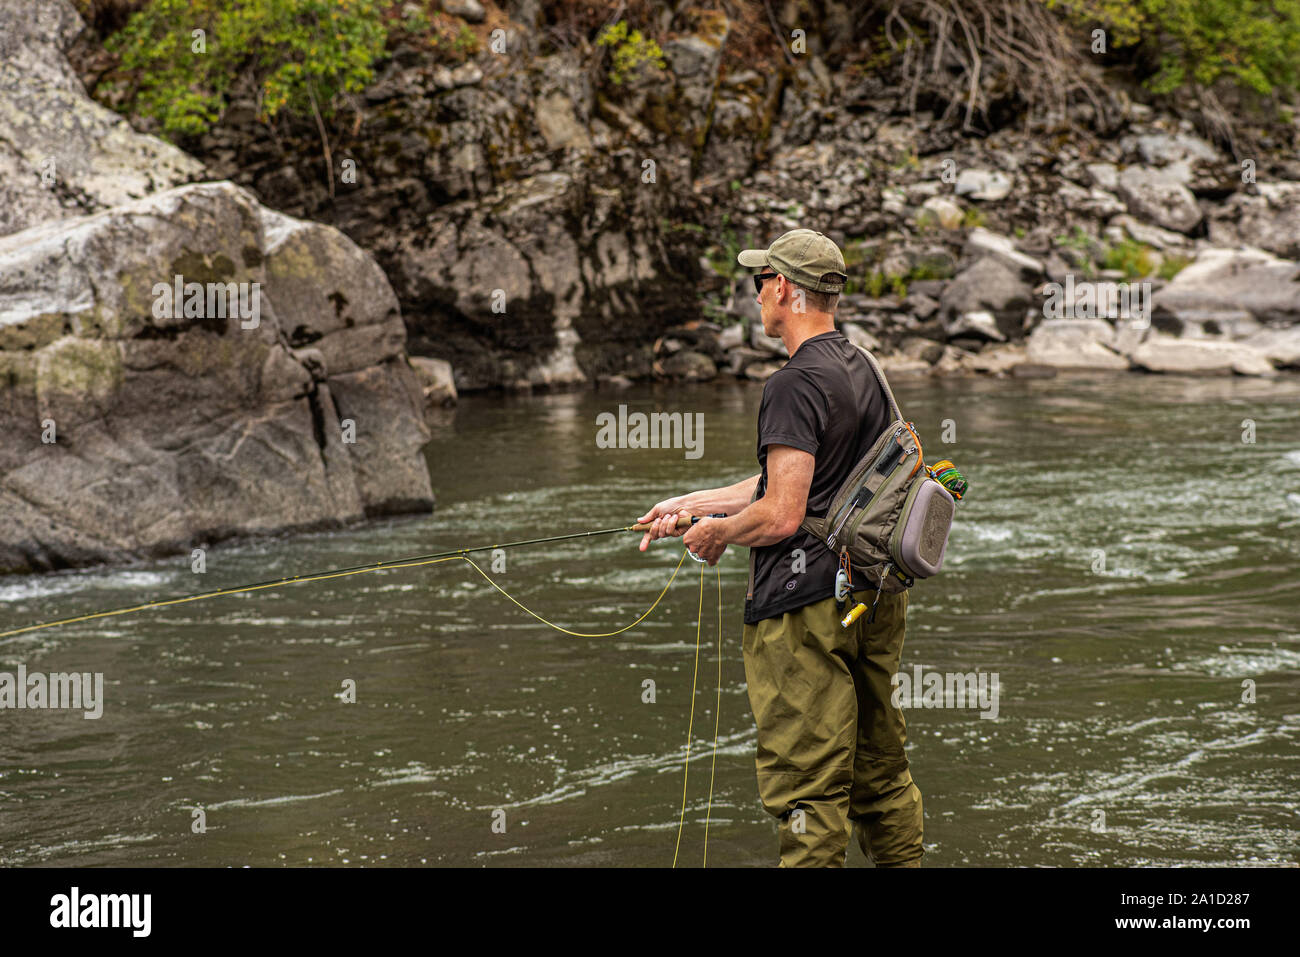 Fly fisherman casting in the mountain stream. Stock Photo